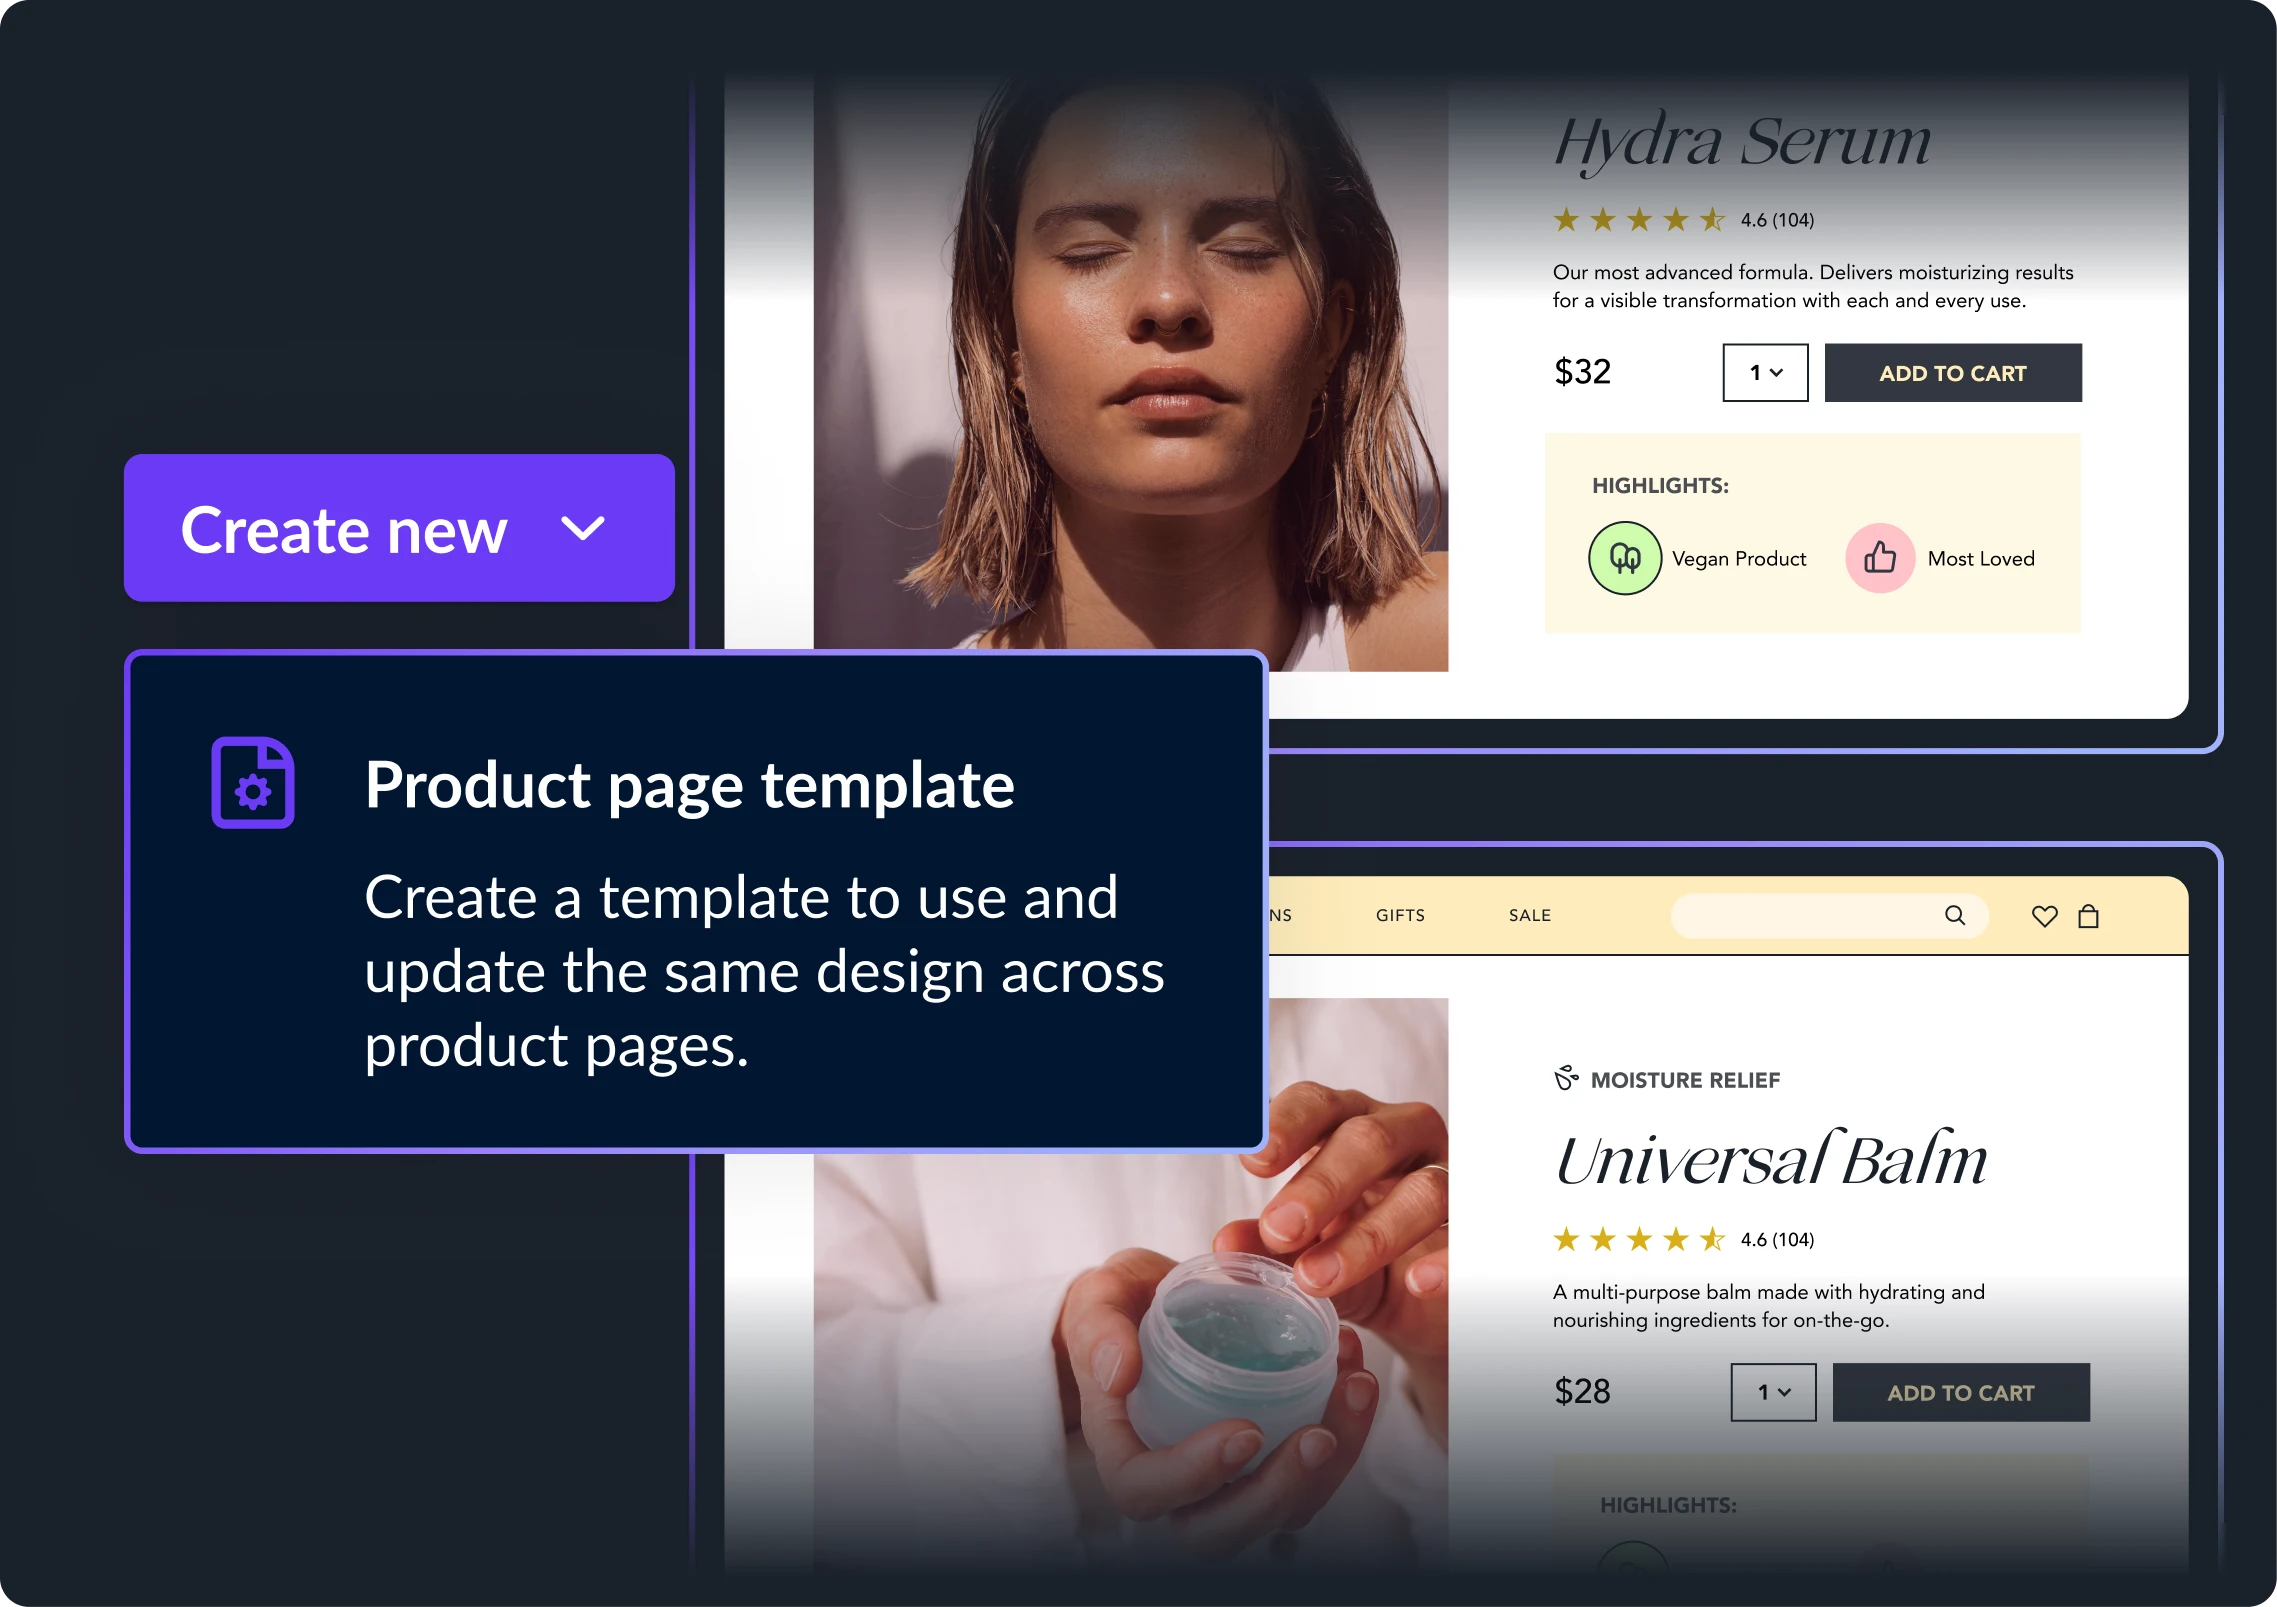 Creating new product page template in Shogun